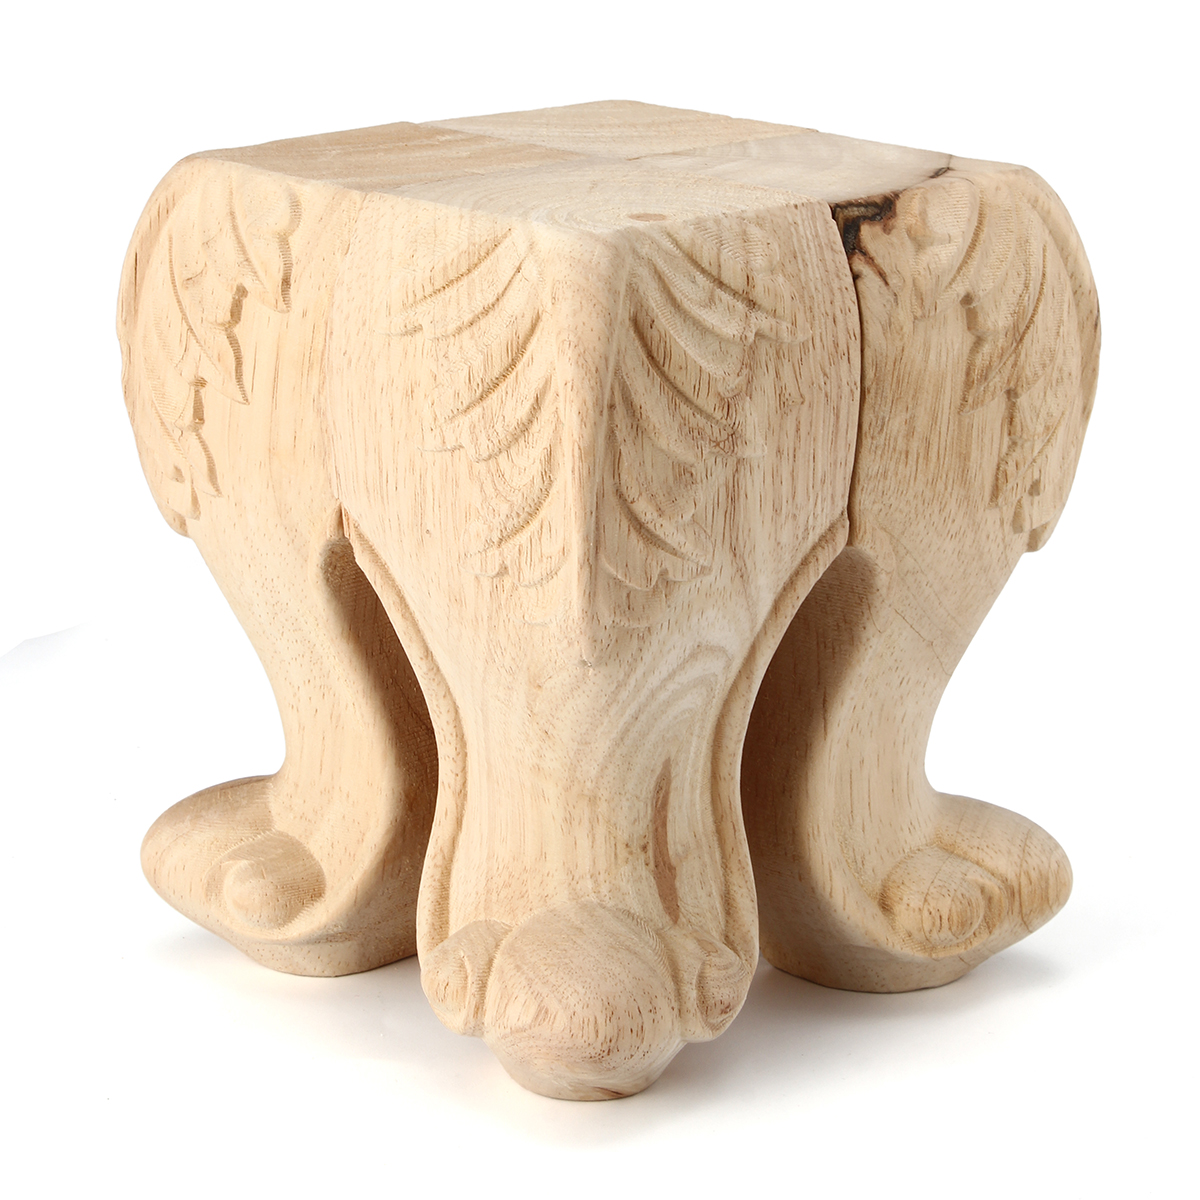 4Pcs-1015cm-European-Solid-Wood-Applique-Carving-Furniture-Foot-Legs-Unpainted-Cabinet-Feets-Decal-1322685-4